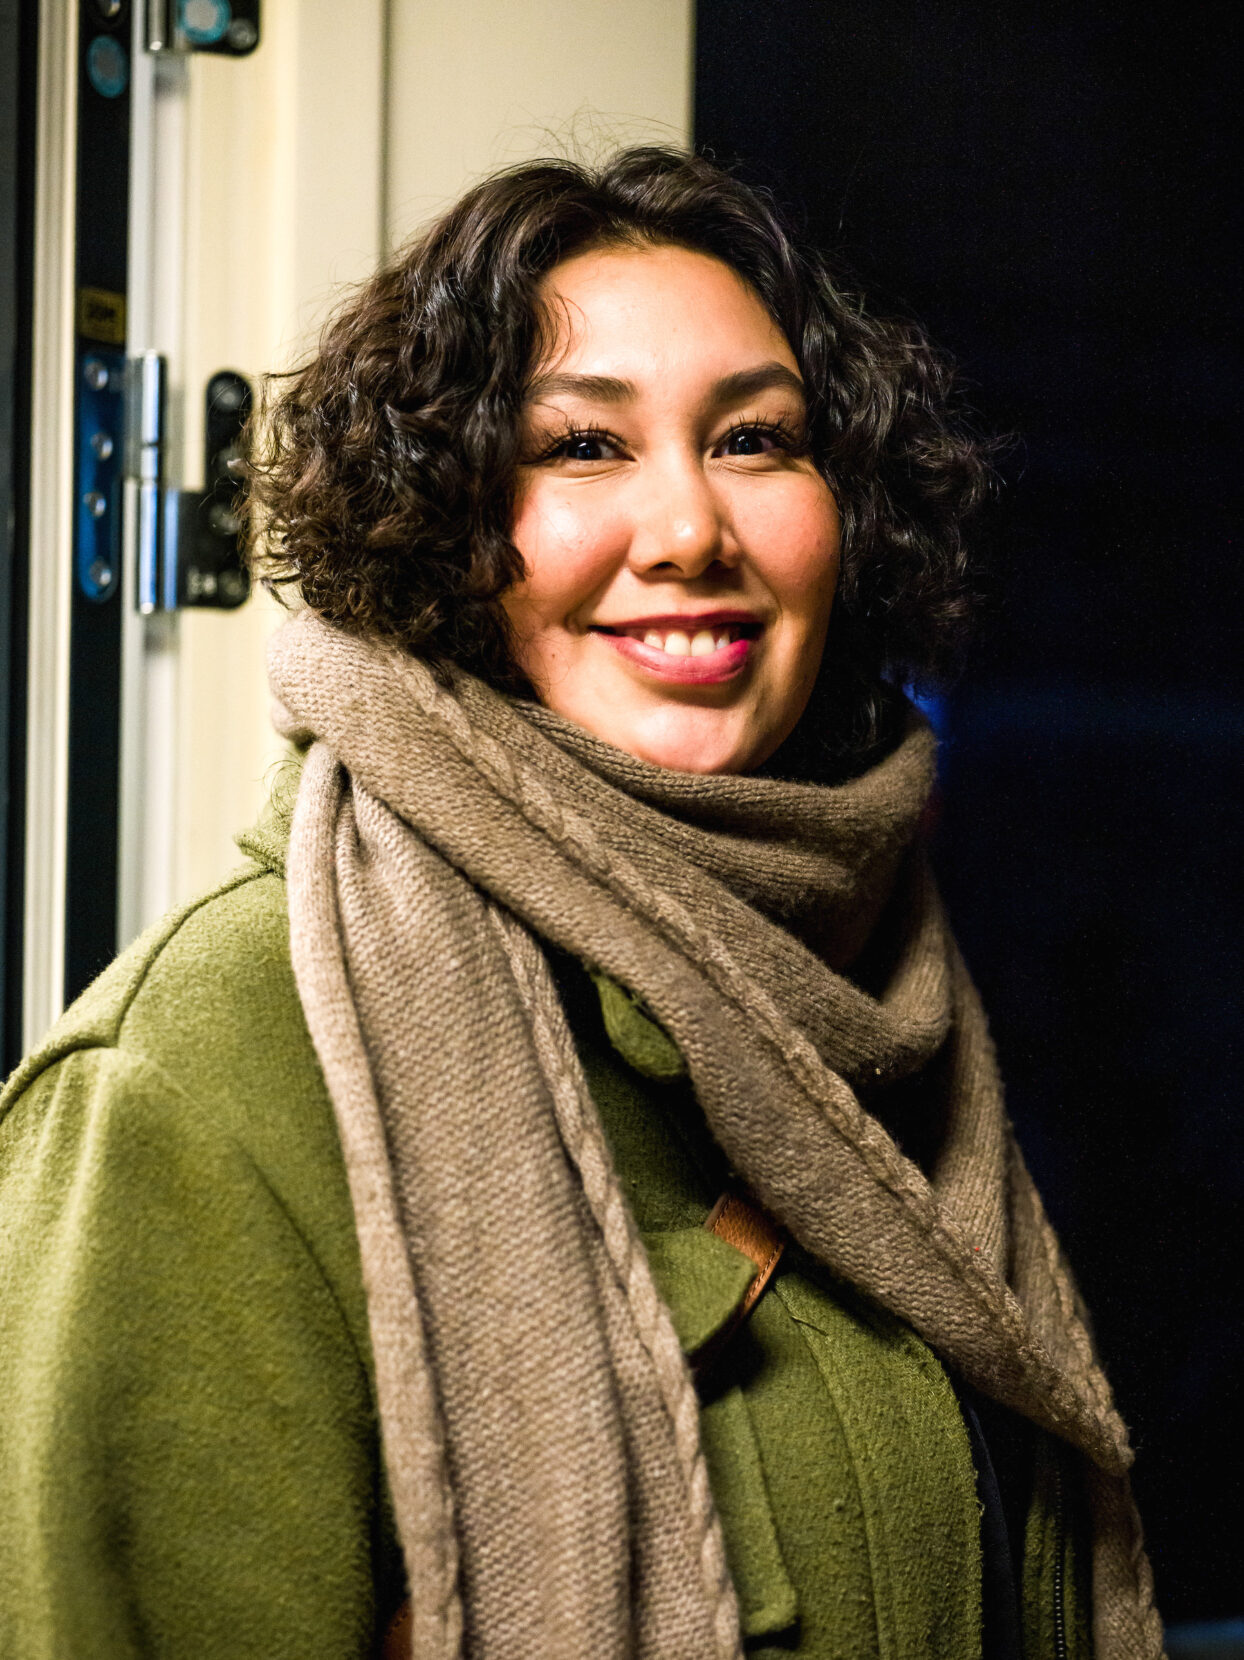 A portrait of a smiling young woman with a gray scarf and curly black hair.